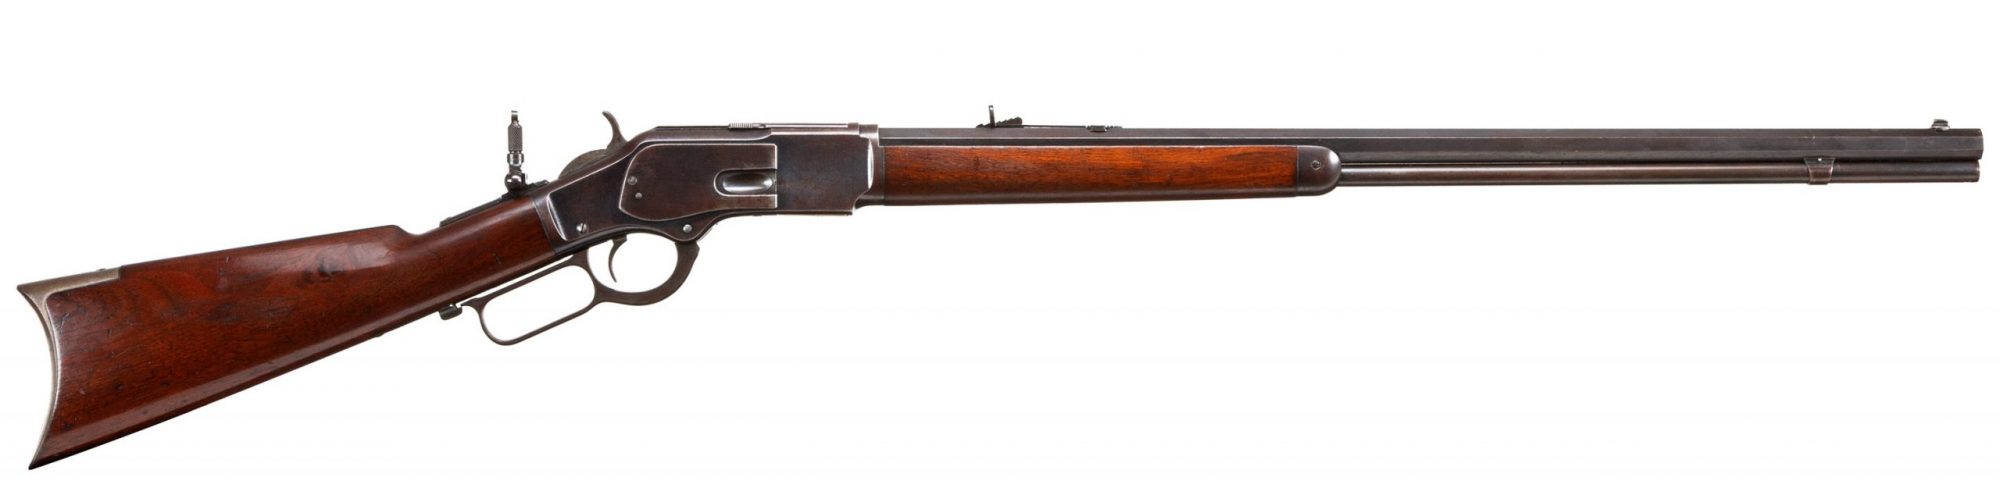 Photo of an antique Winchester Model 1873, for sale through Turnbull Restoration